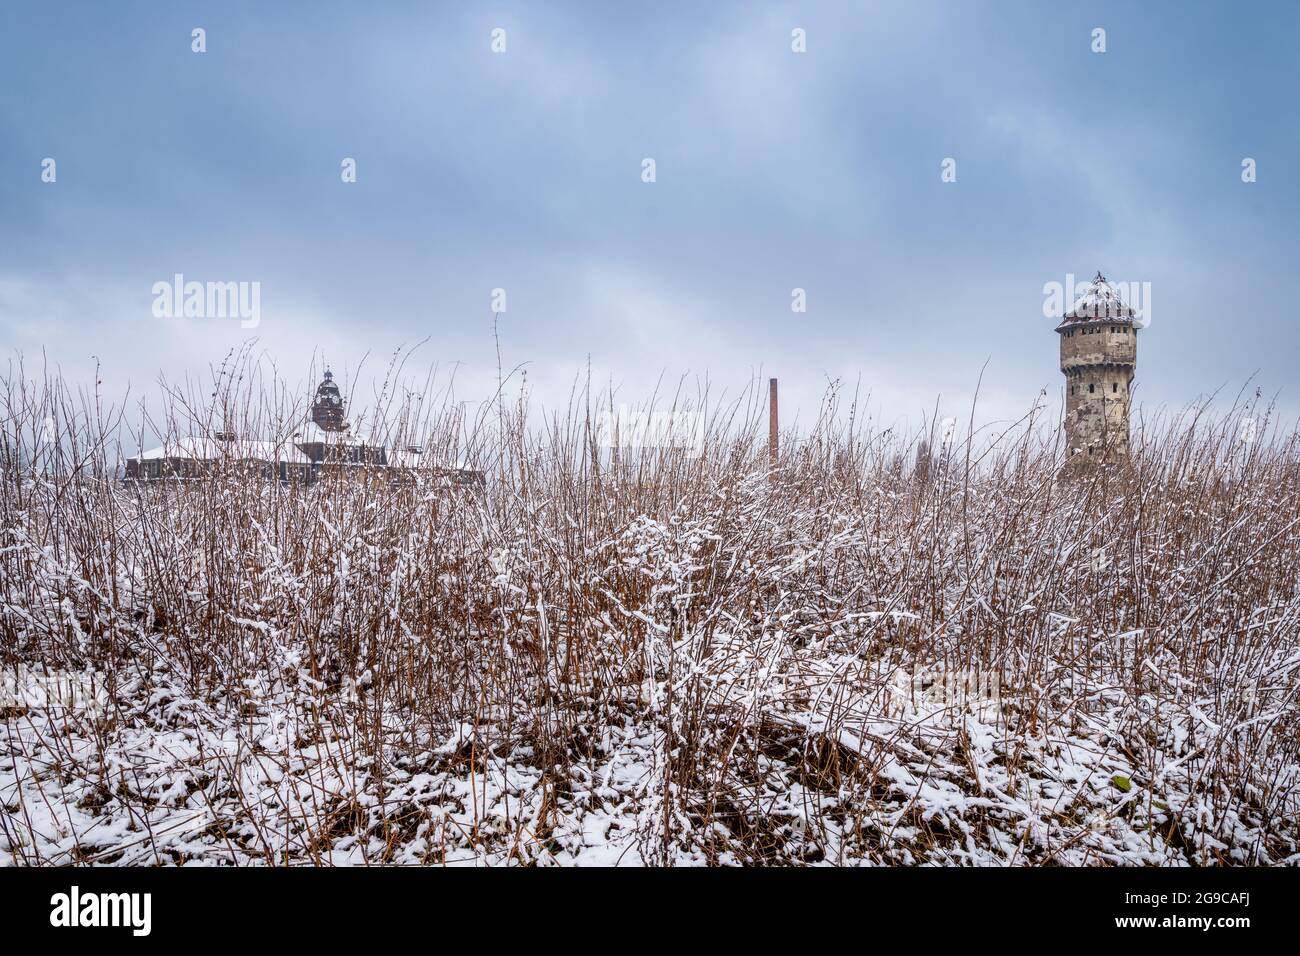 Winter view on an abandoned, 19th-century ironworks building and water tower, Katowice, Silesia, Poland Stock Photo